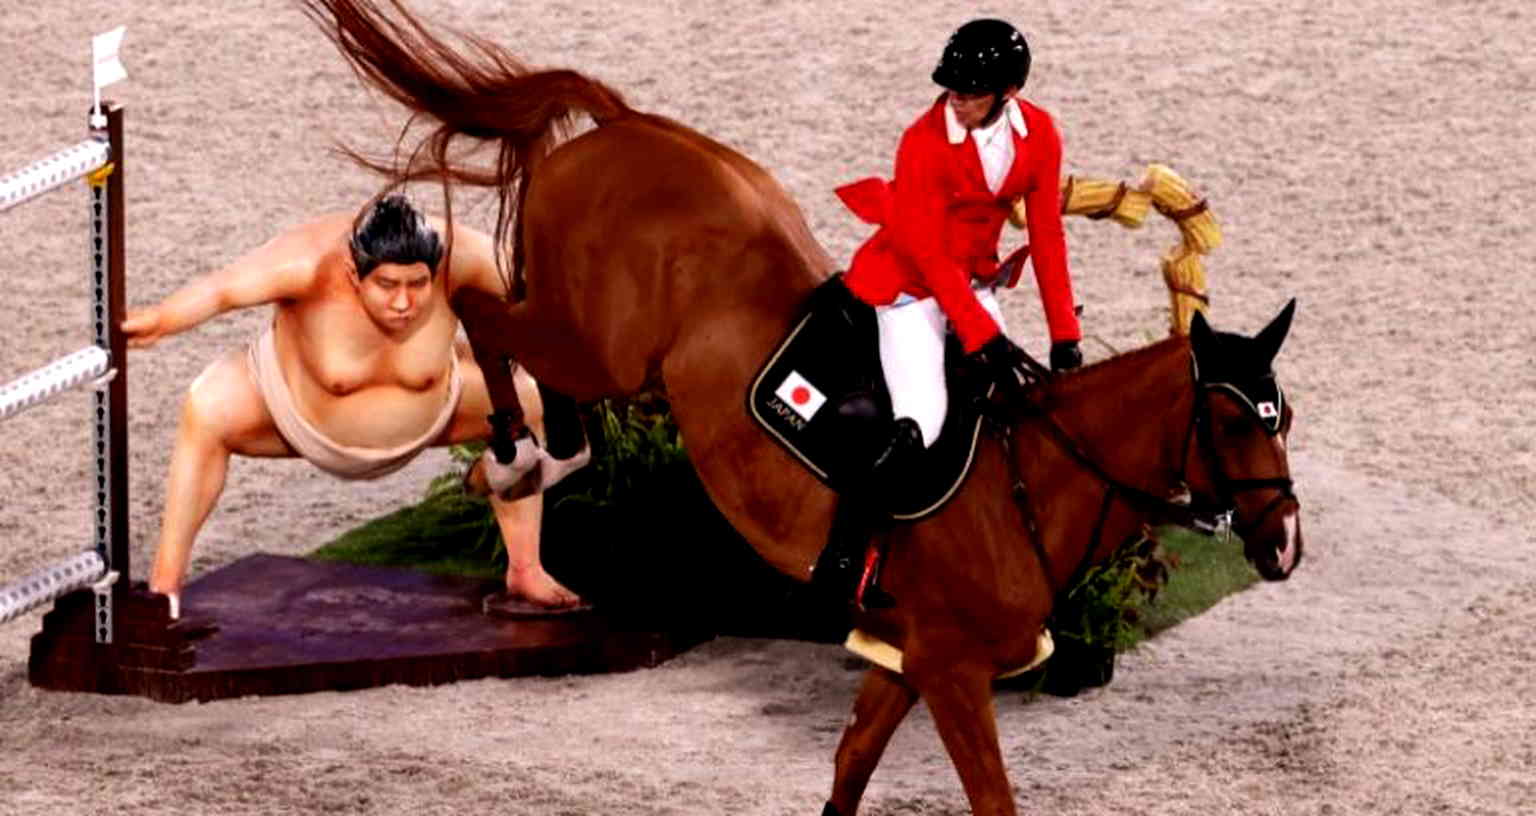 ‘You see a big guy’s butt’: Sumo wrestler statue at Olympics equestrian show allegedly ‘spooks’ horses